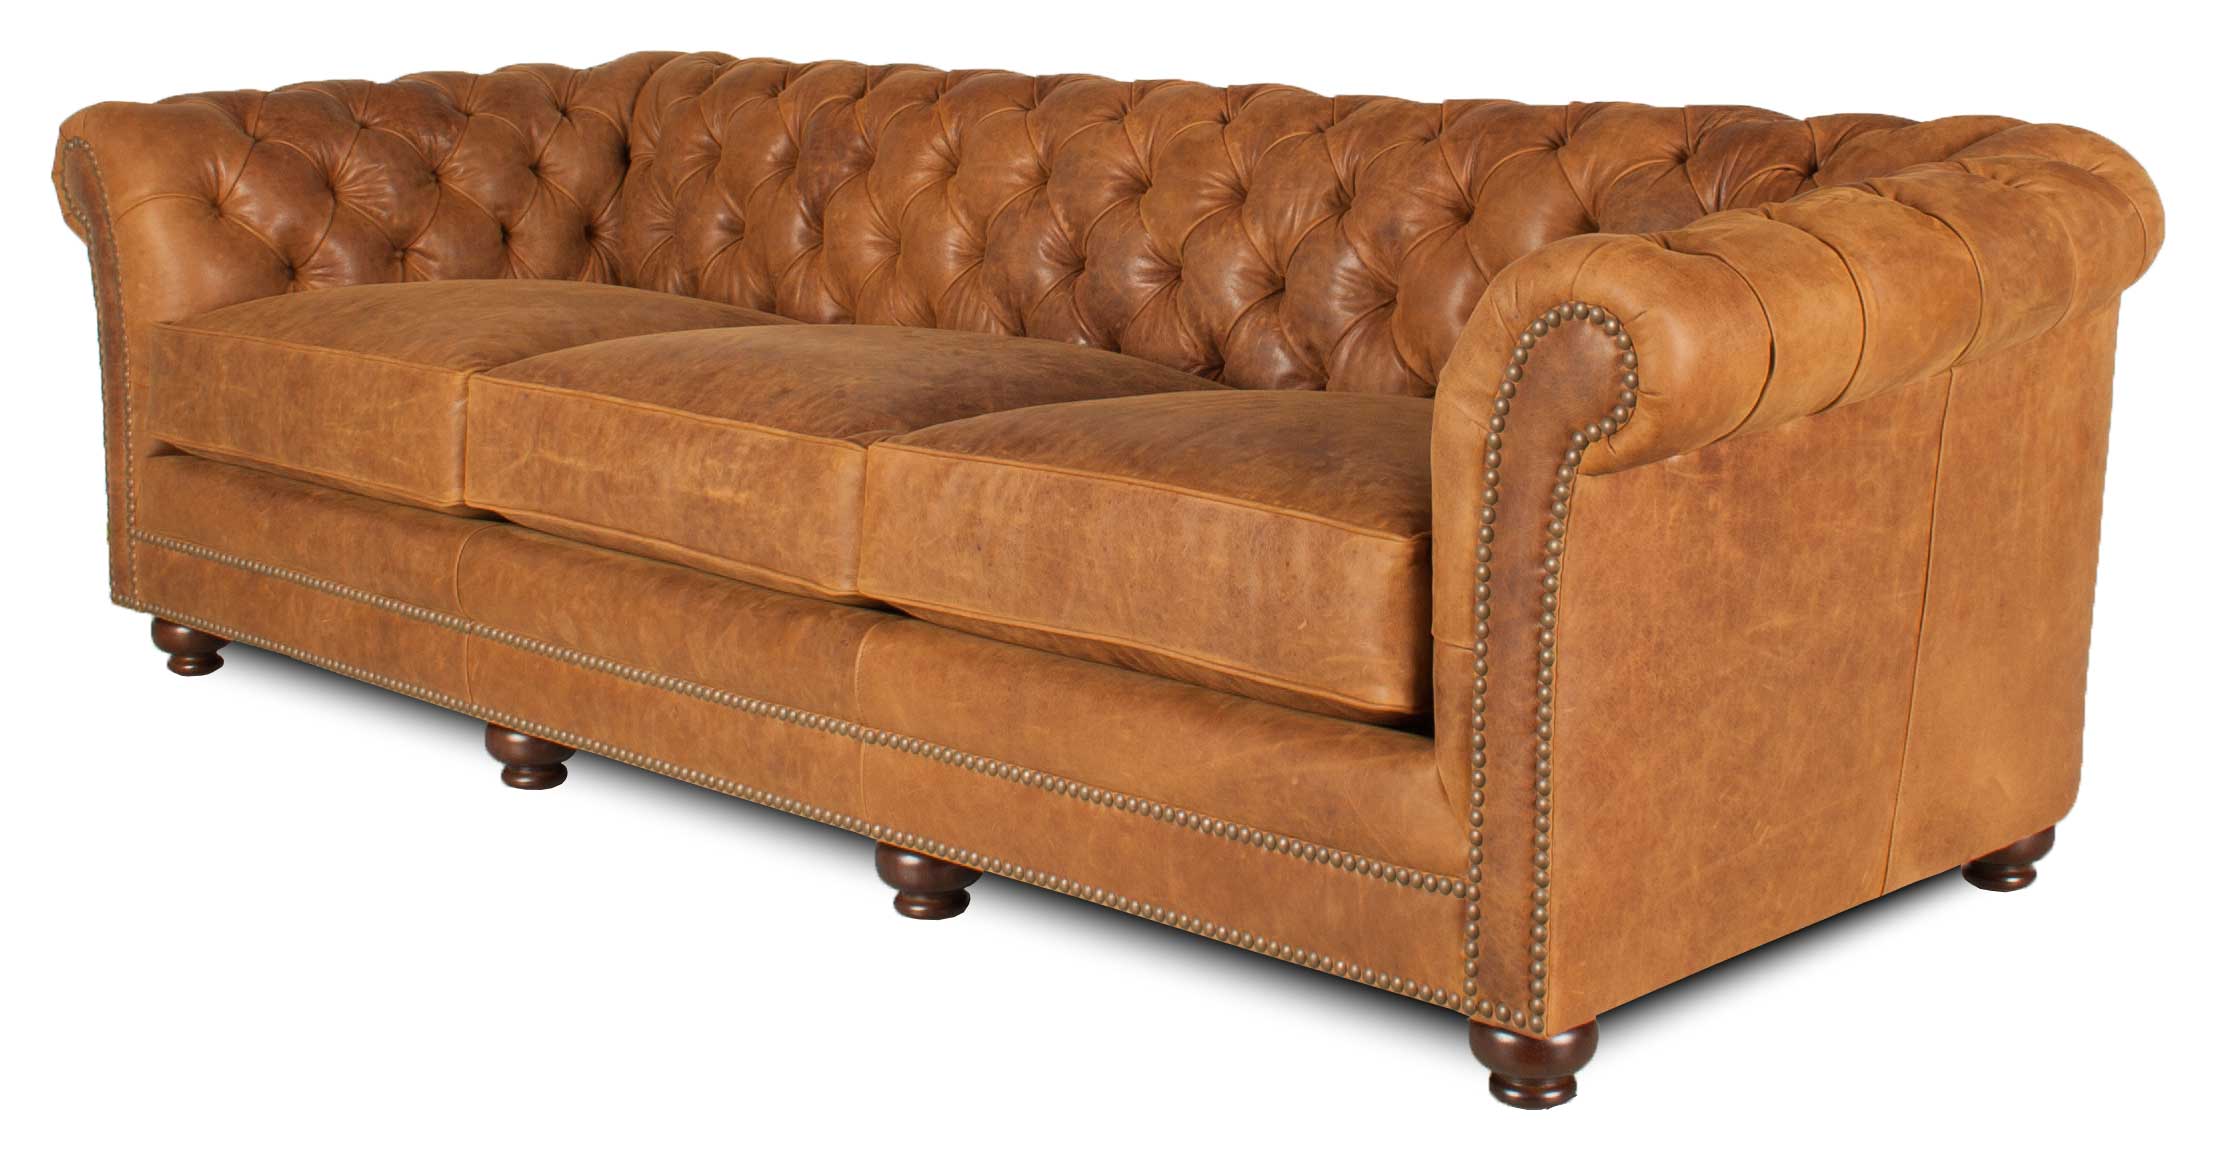 deep-traditional-chesterfield-classic-leather-creations-atlanta-chicago-austin-tan-brown-rustic